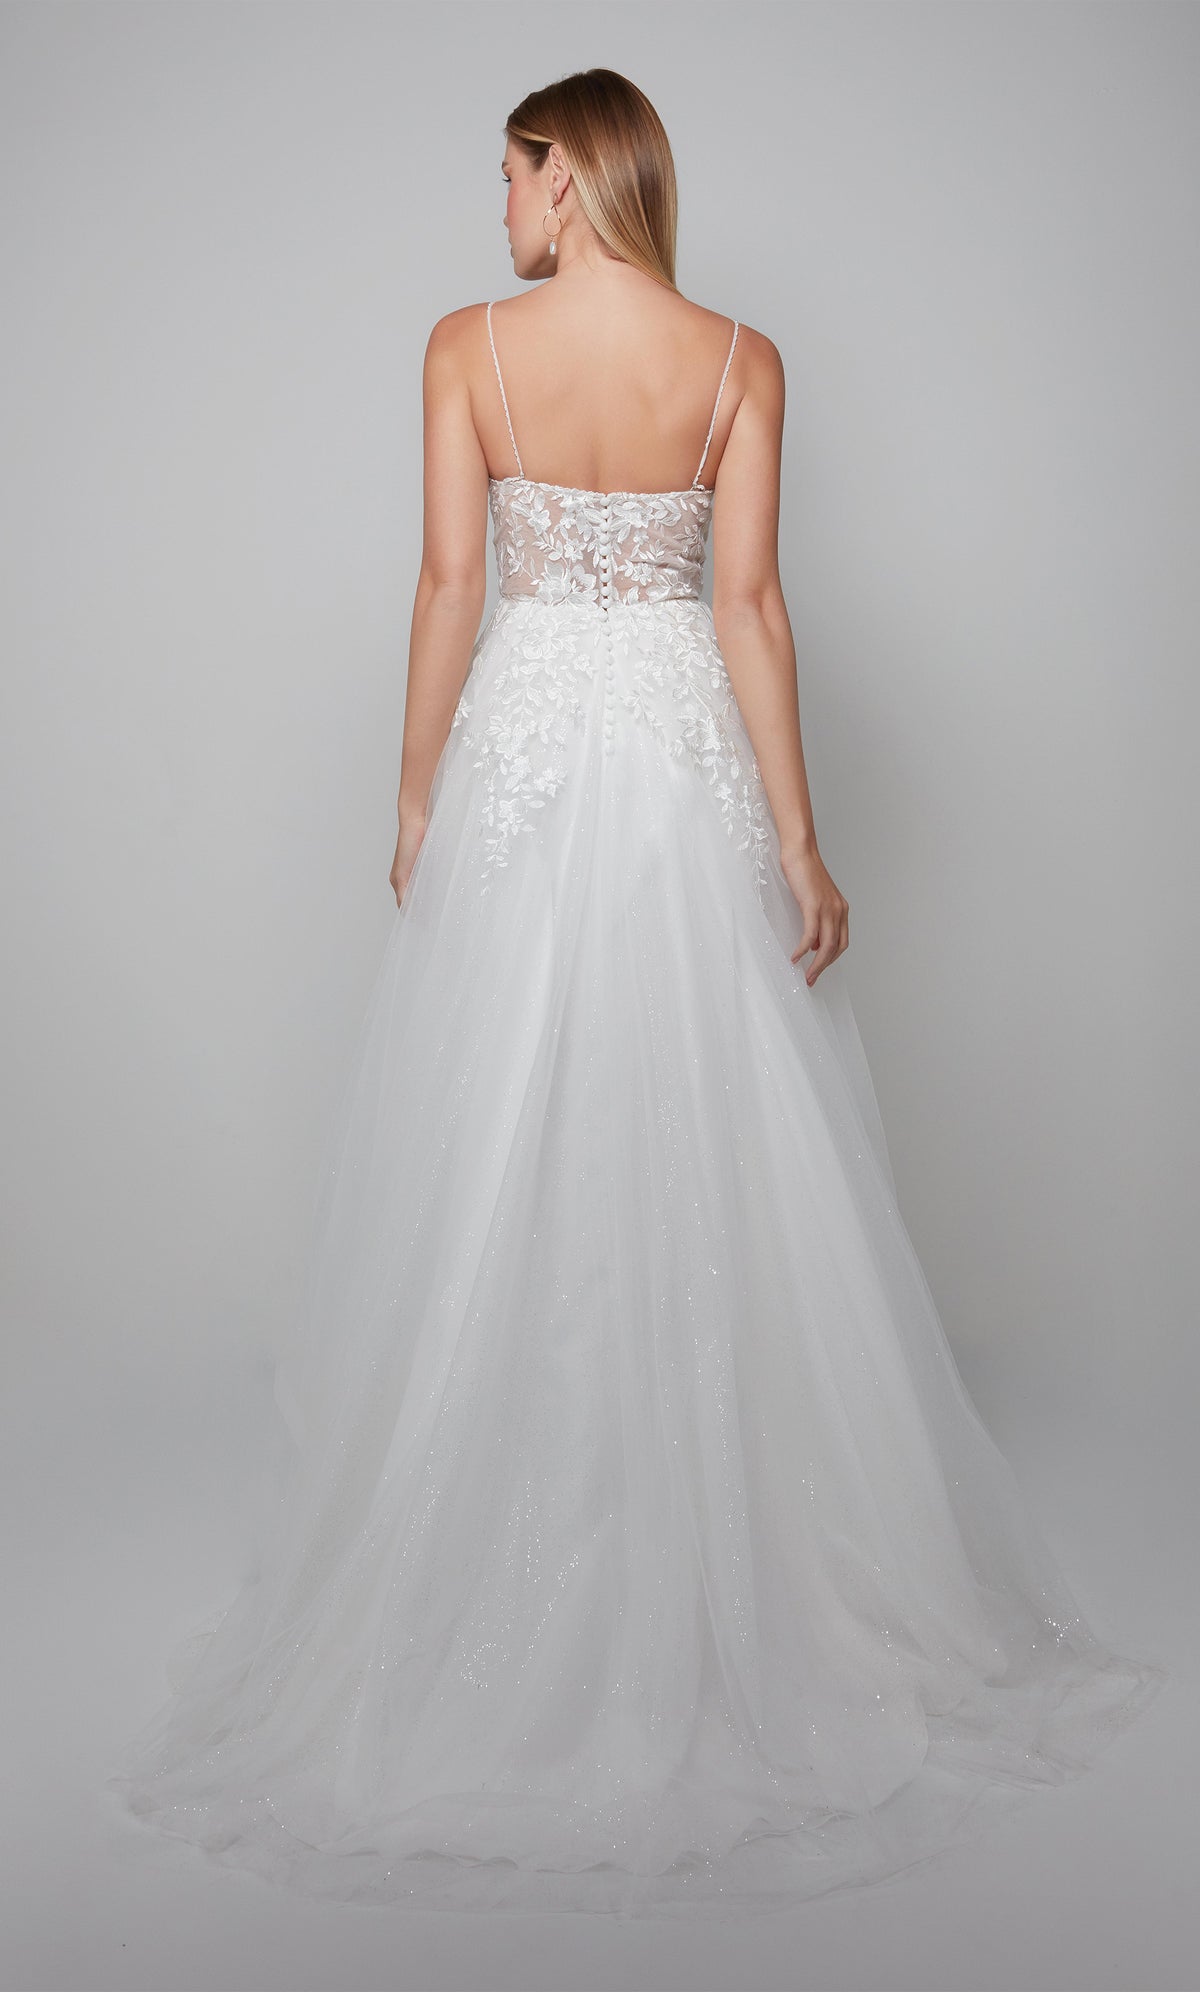 Classic tulle wedding gown with a sheer lace bodice, satin buttons, and train in ivory.